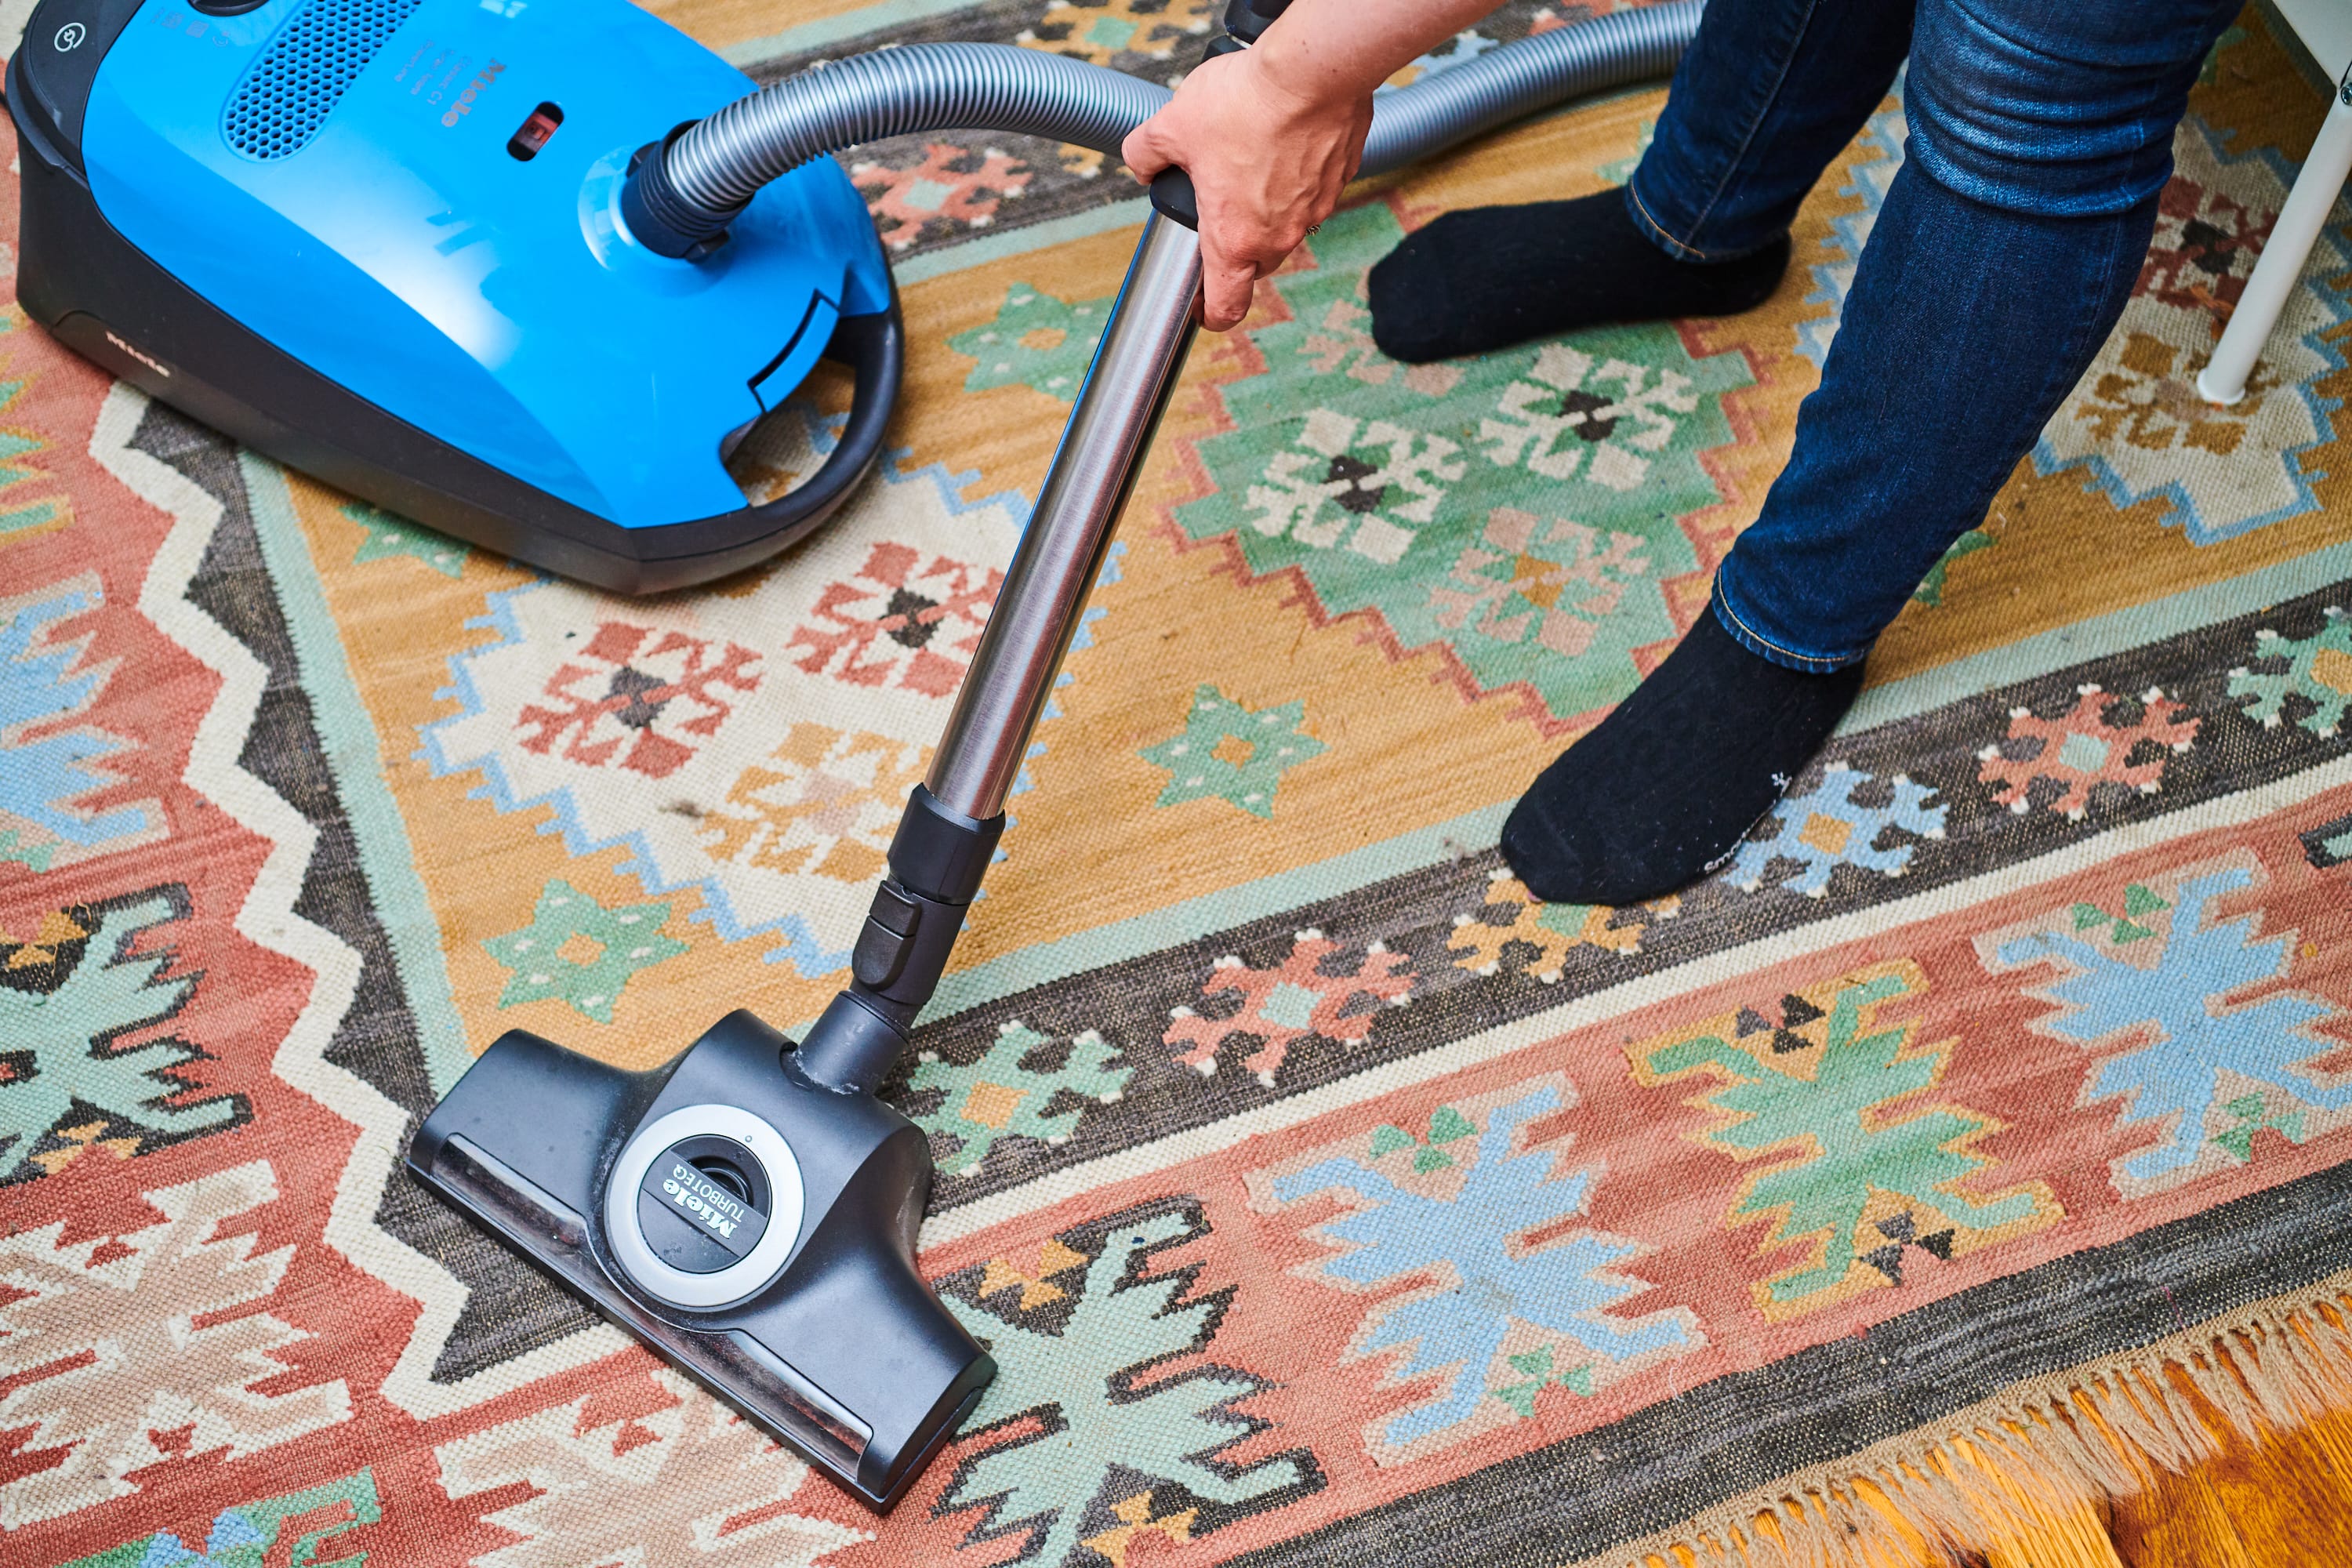 How Can I Deep Clean My Carpet Without A Machine